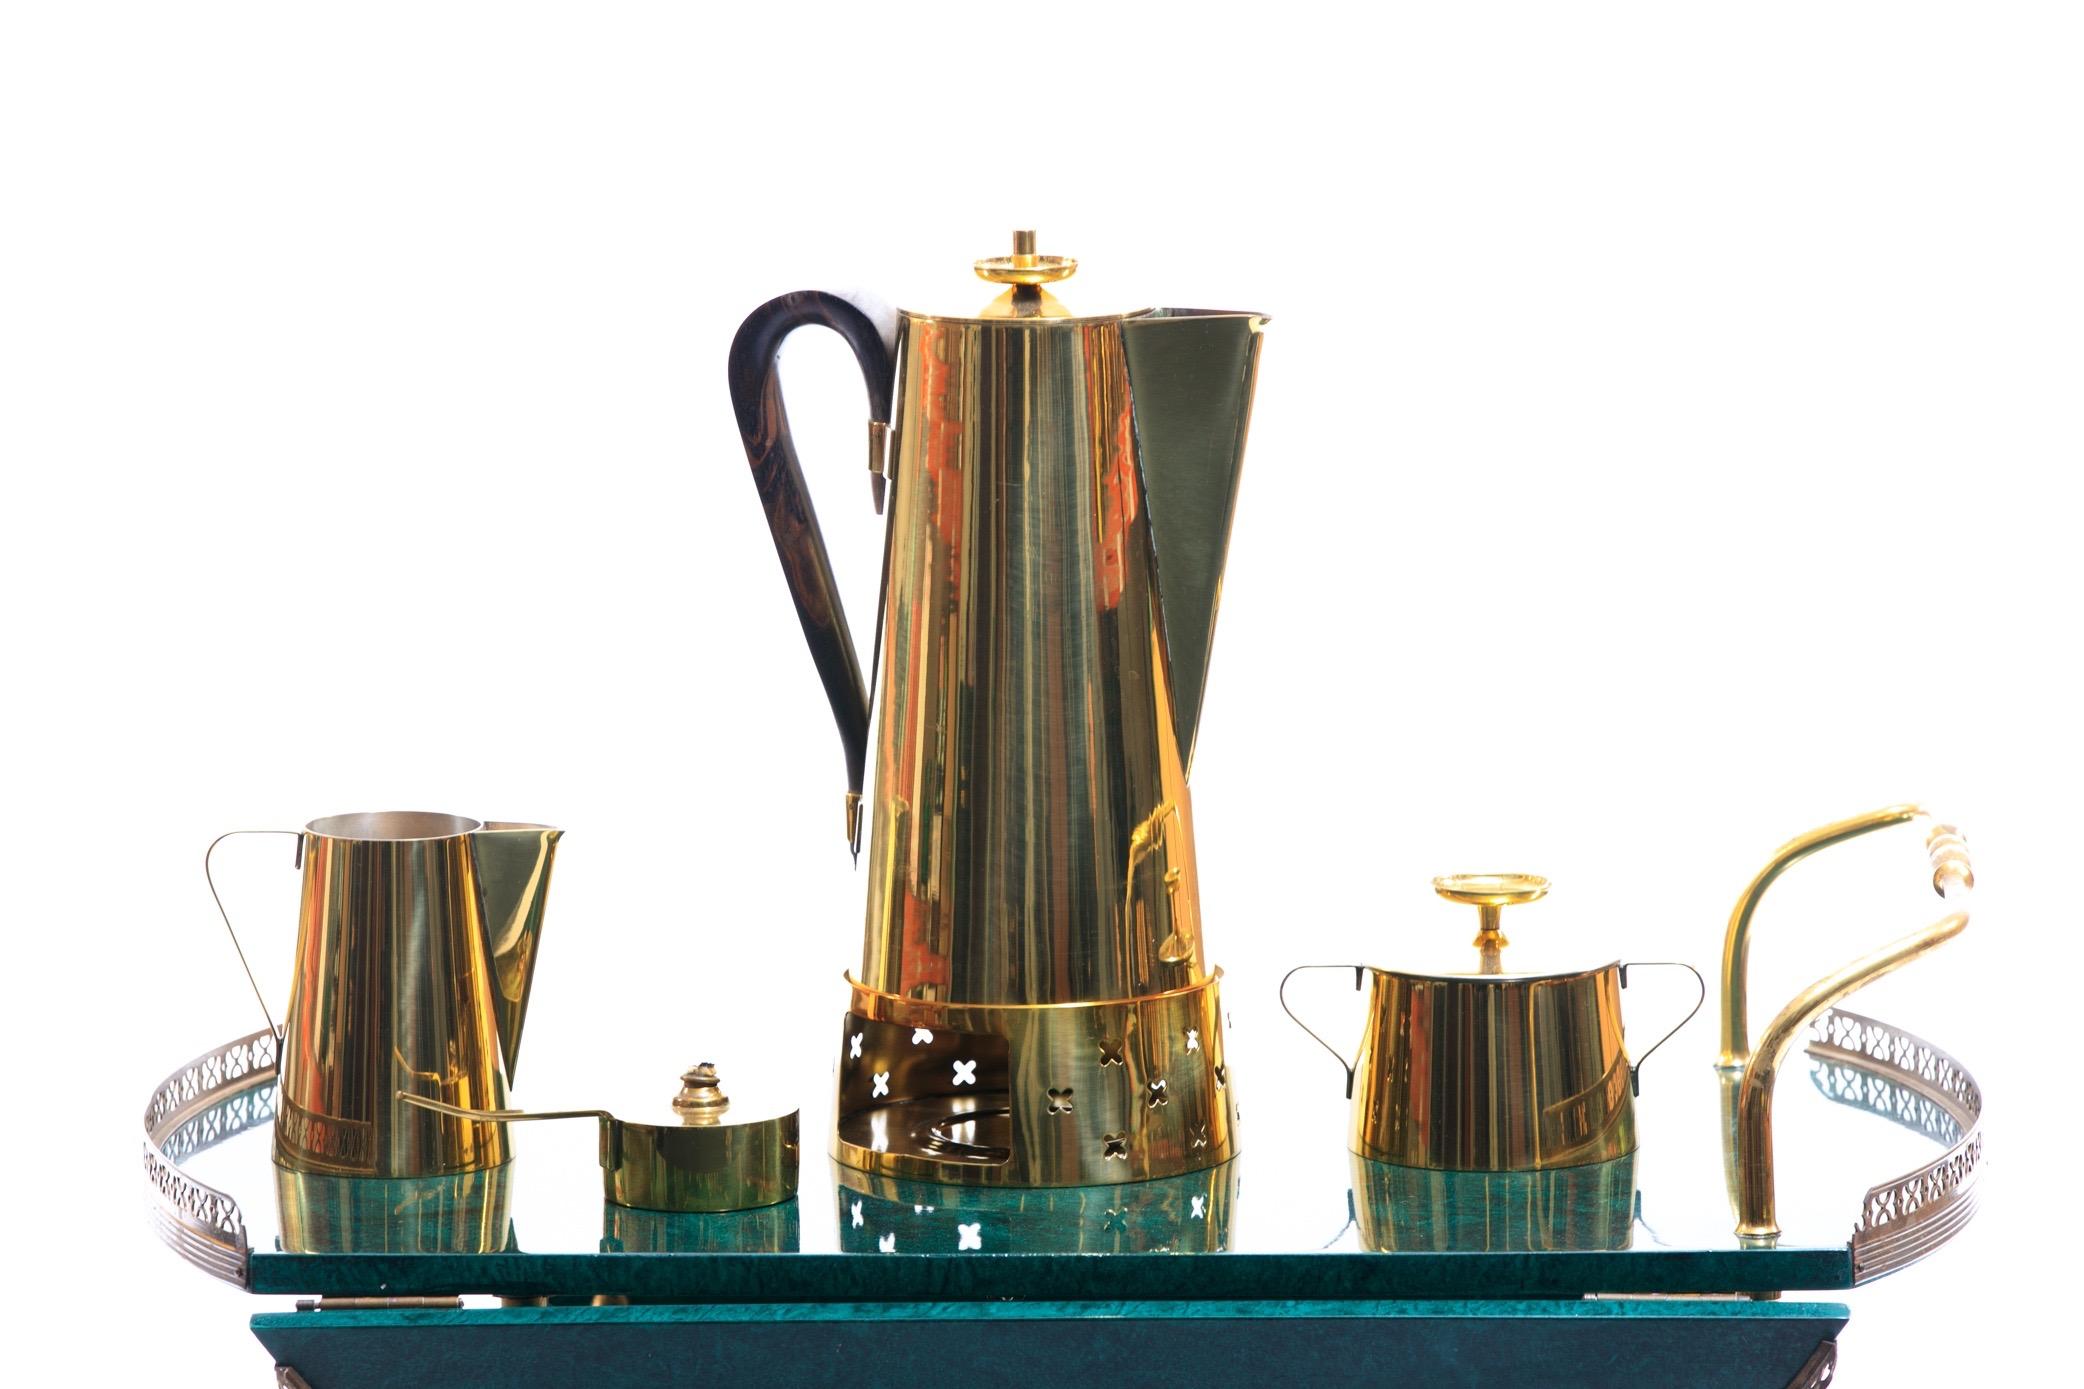 Beautiful vintage Tommi Parzinger coffee / tea set in its original brass finish circa 1950s. The set includes a large coffee pot with curved wood handle, stand with etched 